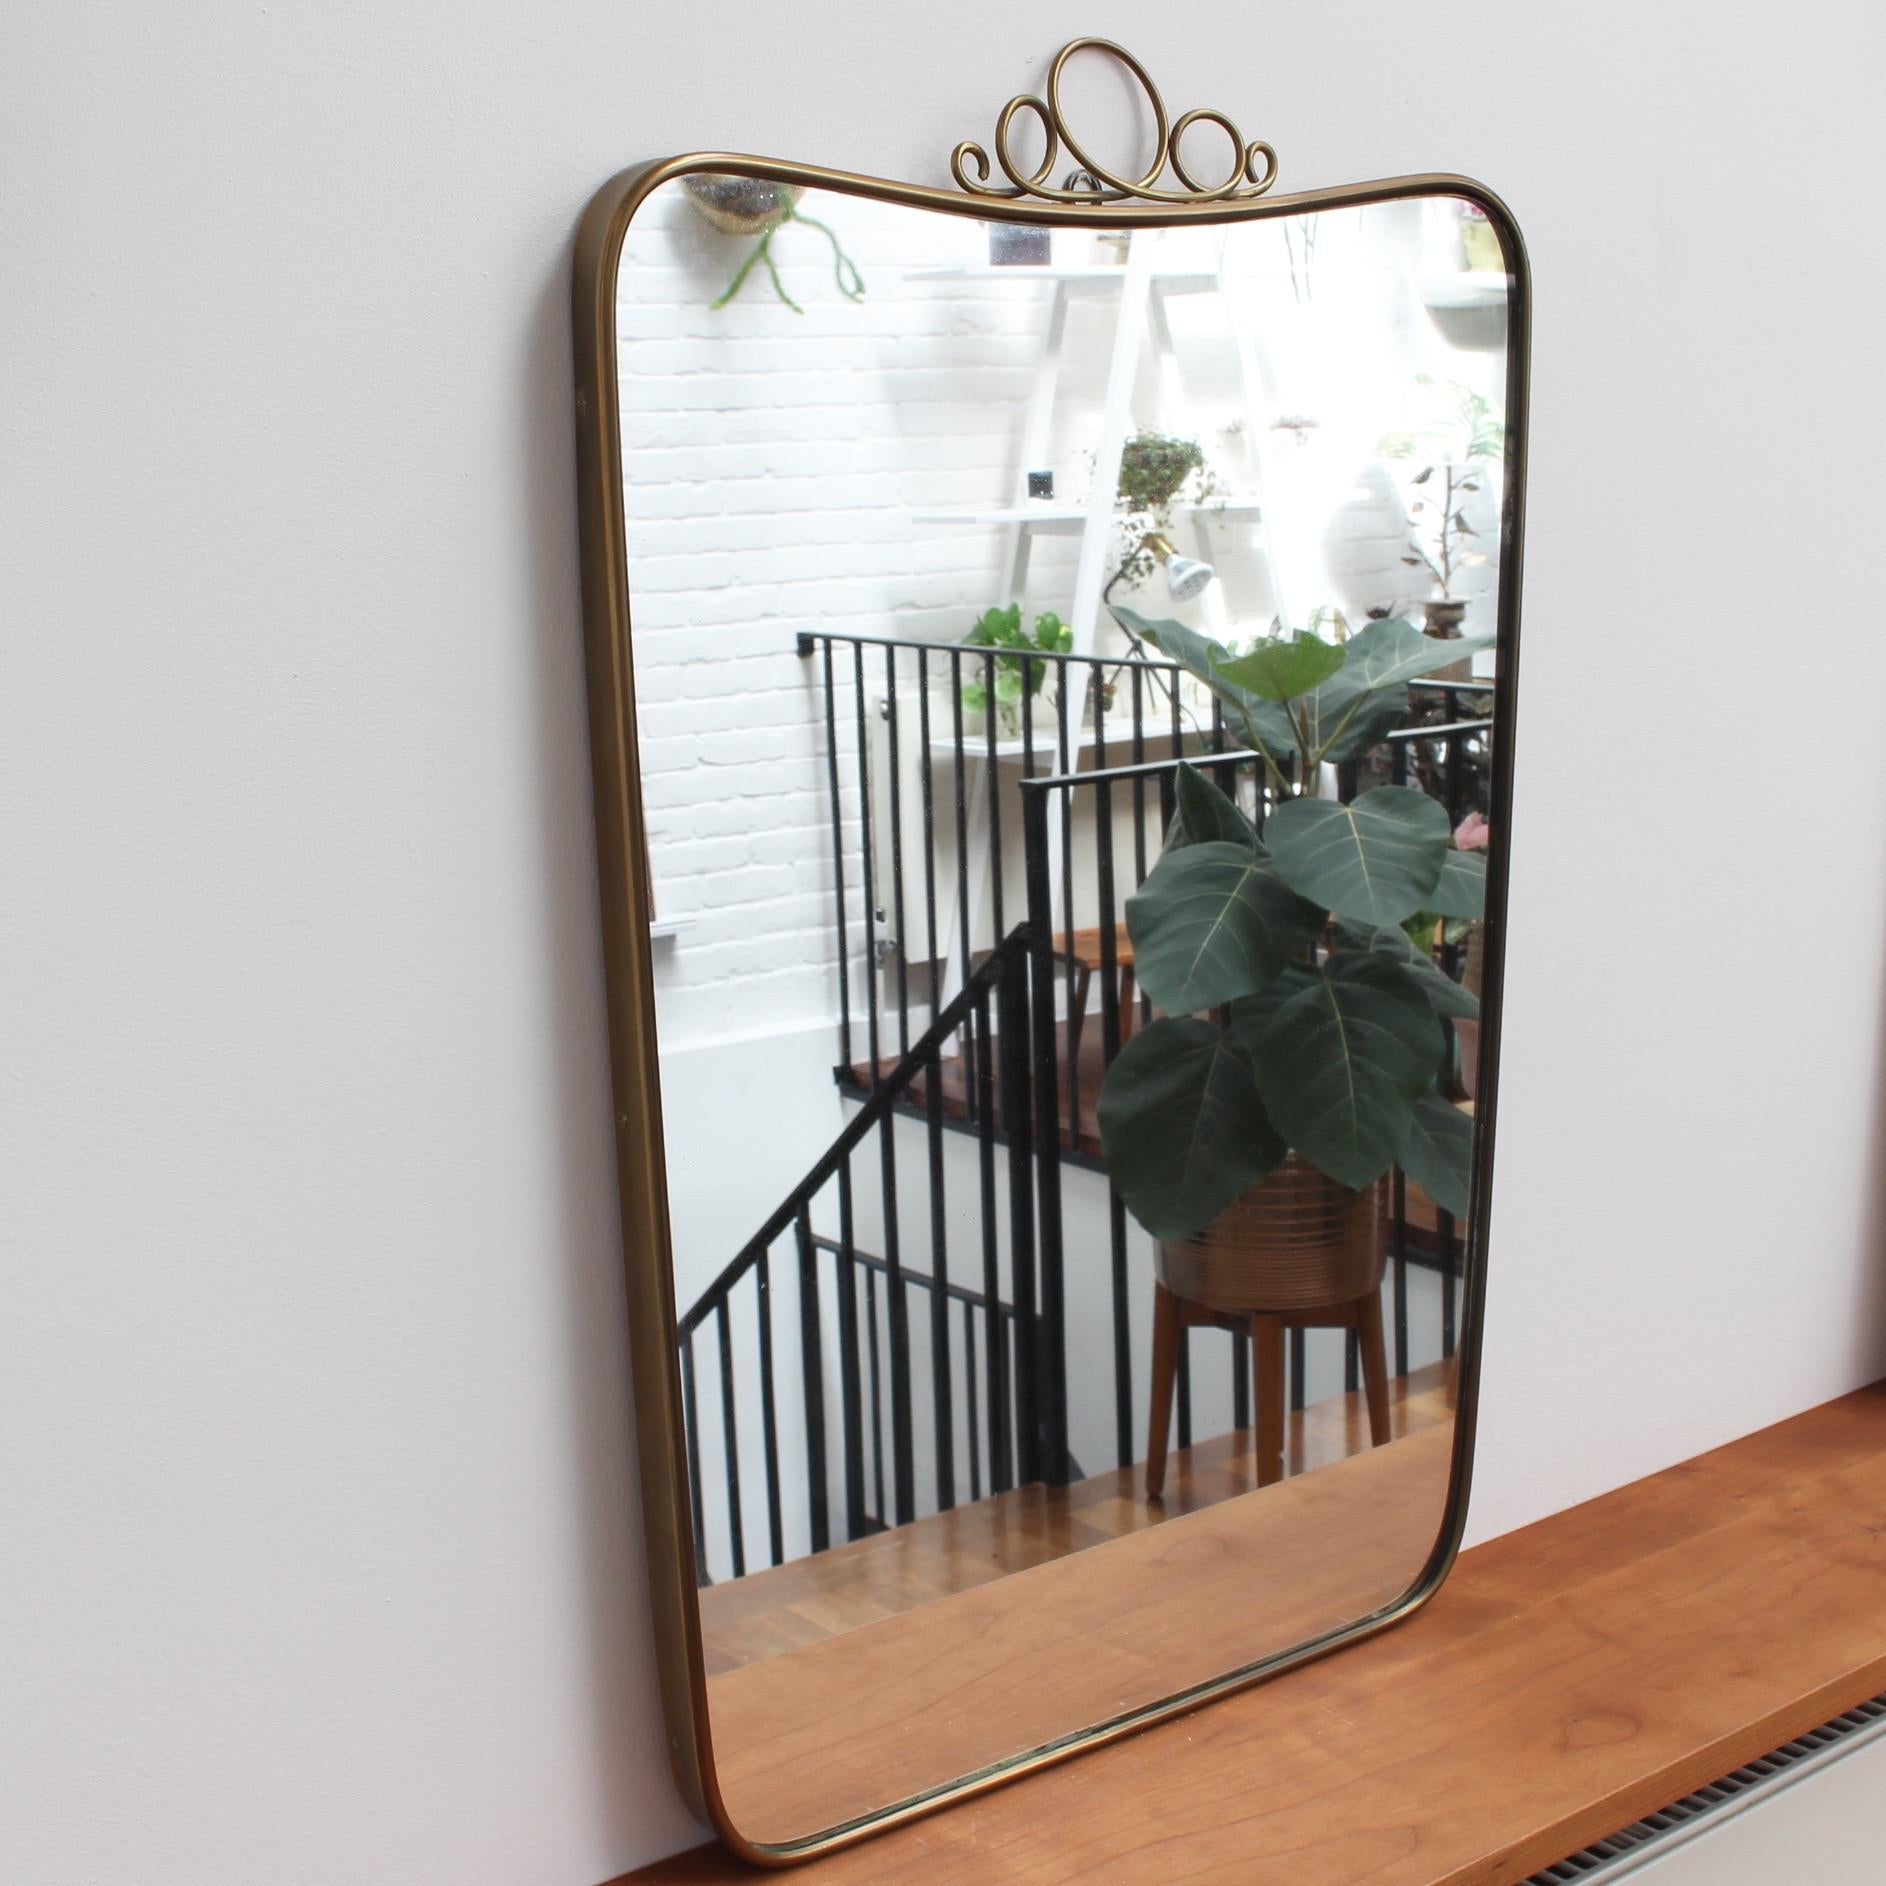 Midcentury Italian wall mirror with brass frame, circa 1950s by Gio Ponti (1891-1979). The mirror is classically shaped, and with its distinctive top-fitted flourish, a clear sign of an original design by Gio Ponti. The mirror is in very good